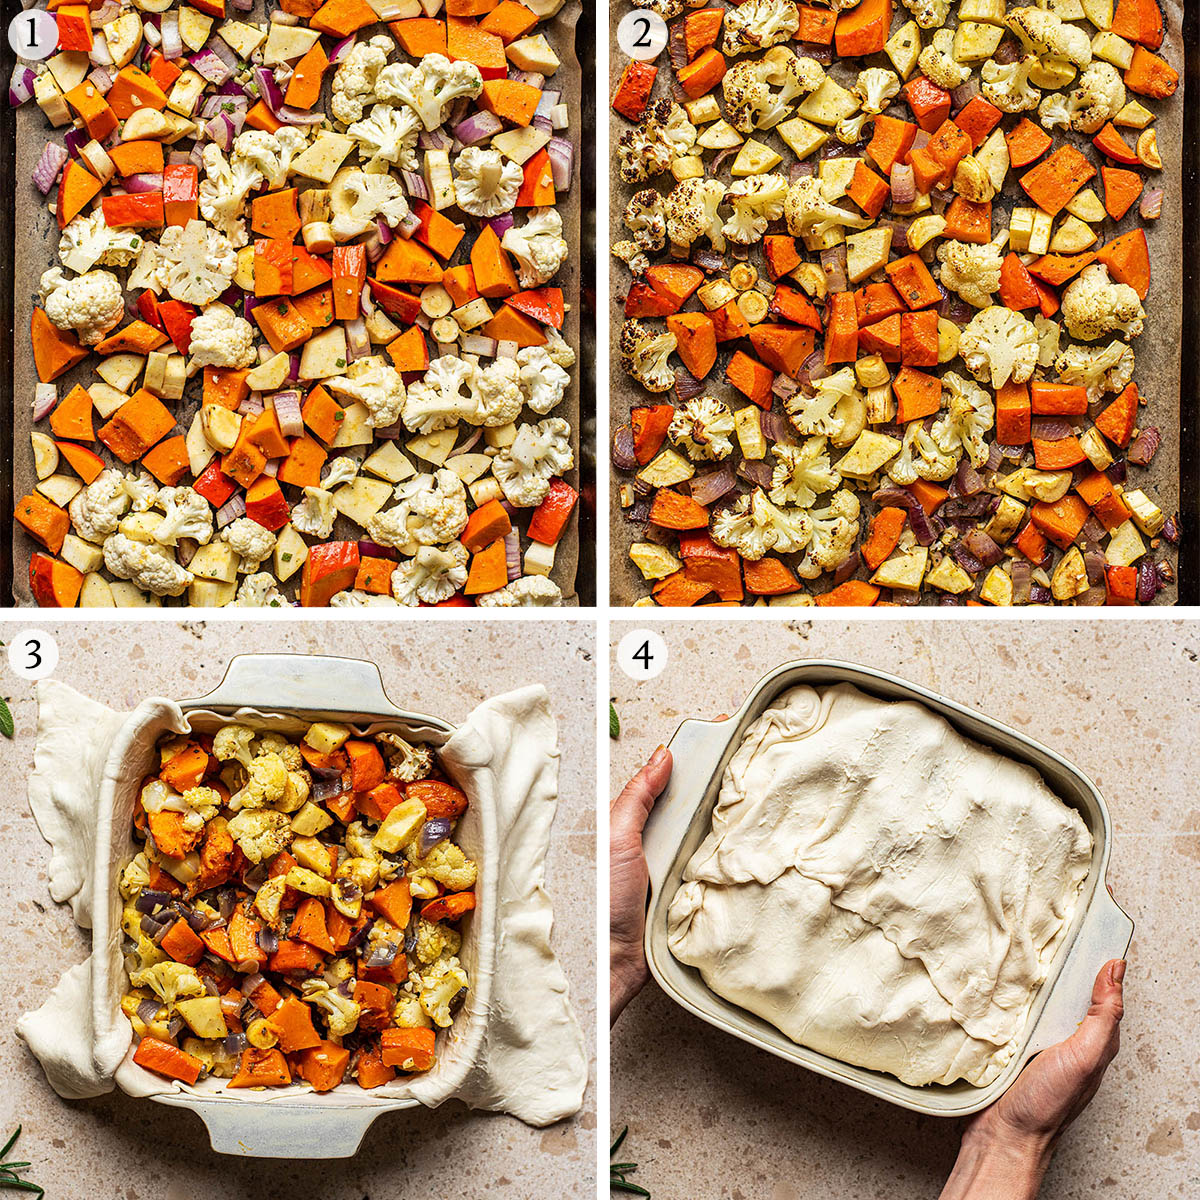 Roasted vegetable pie steps 1 to 4.